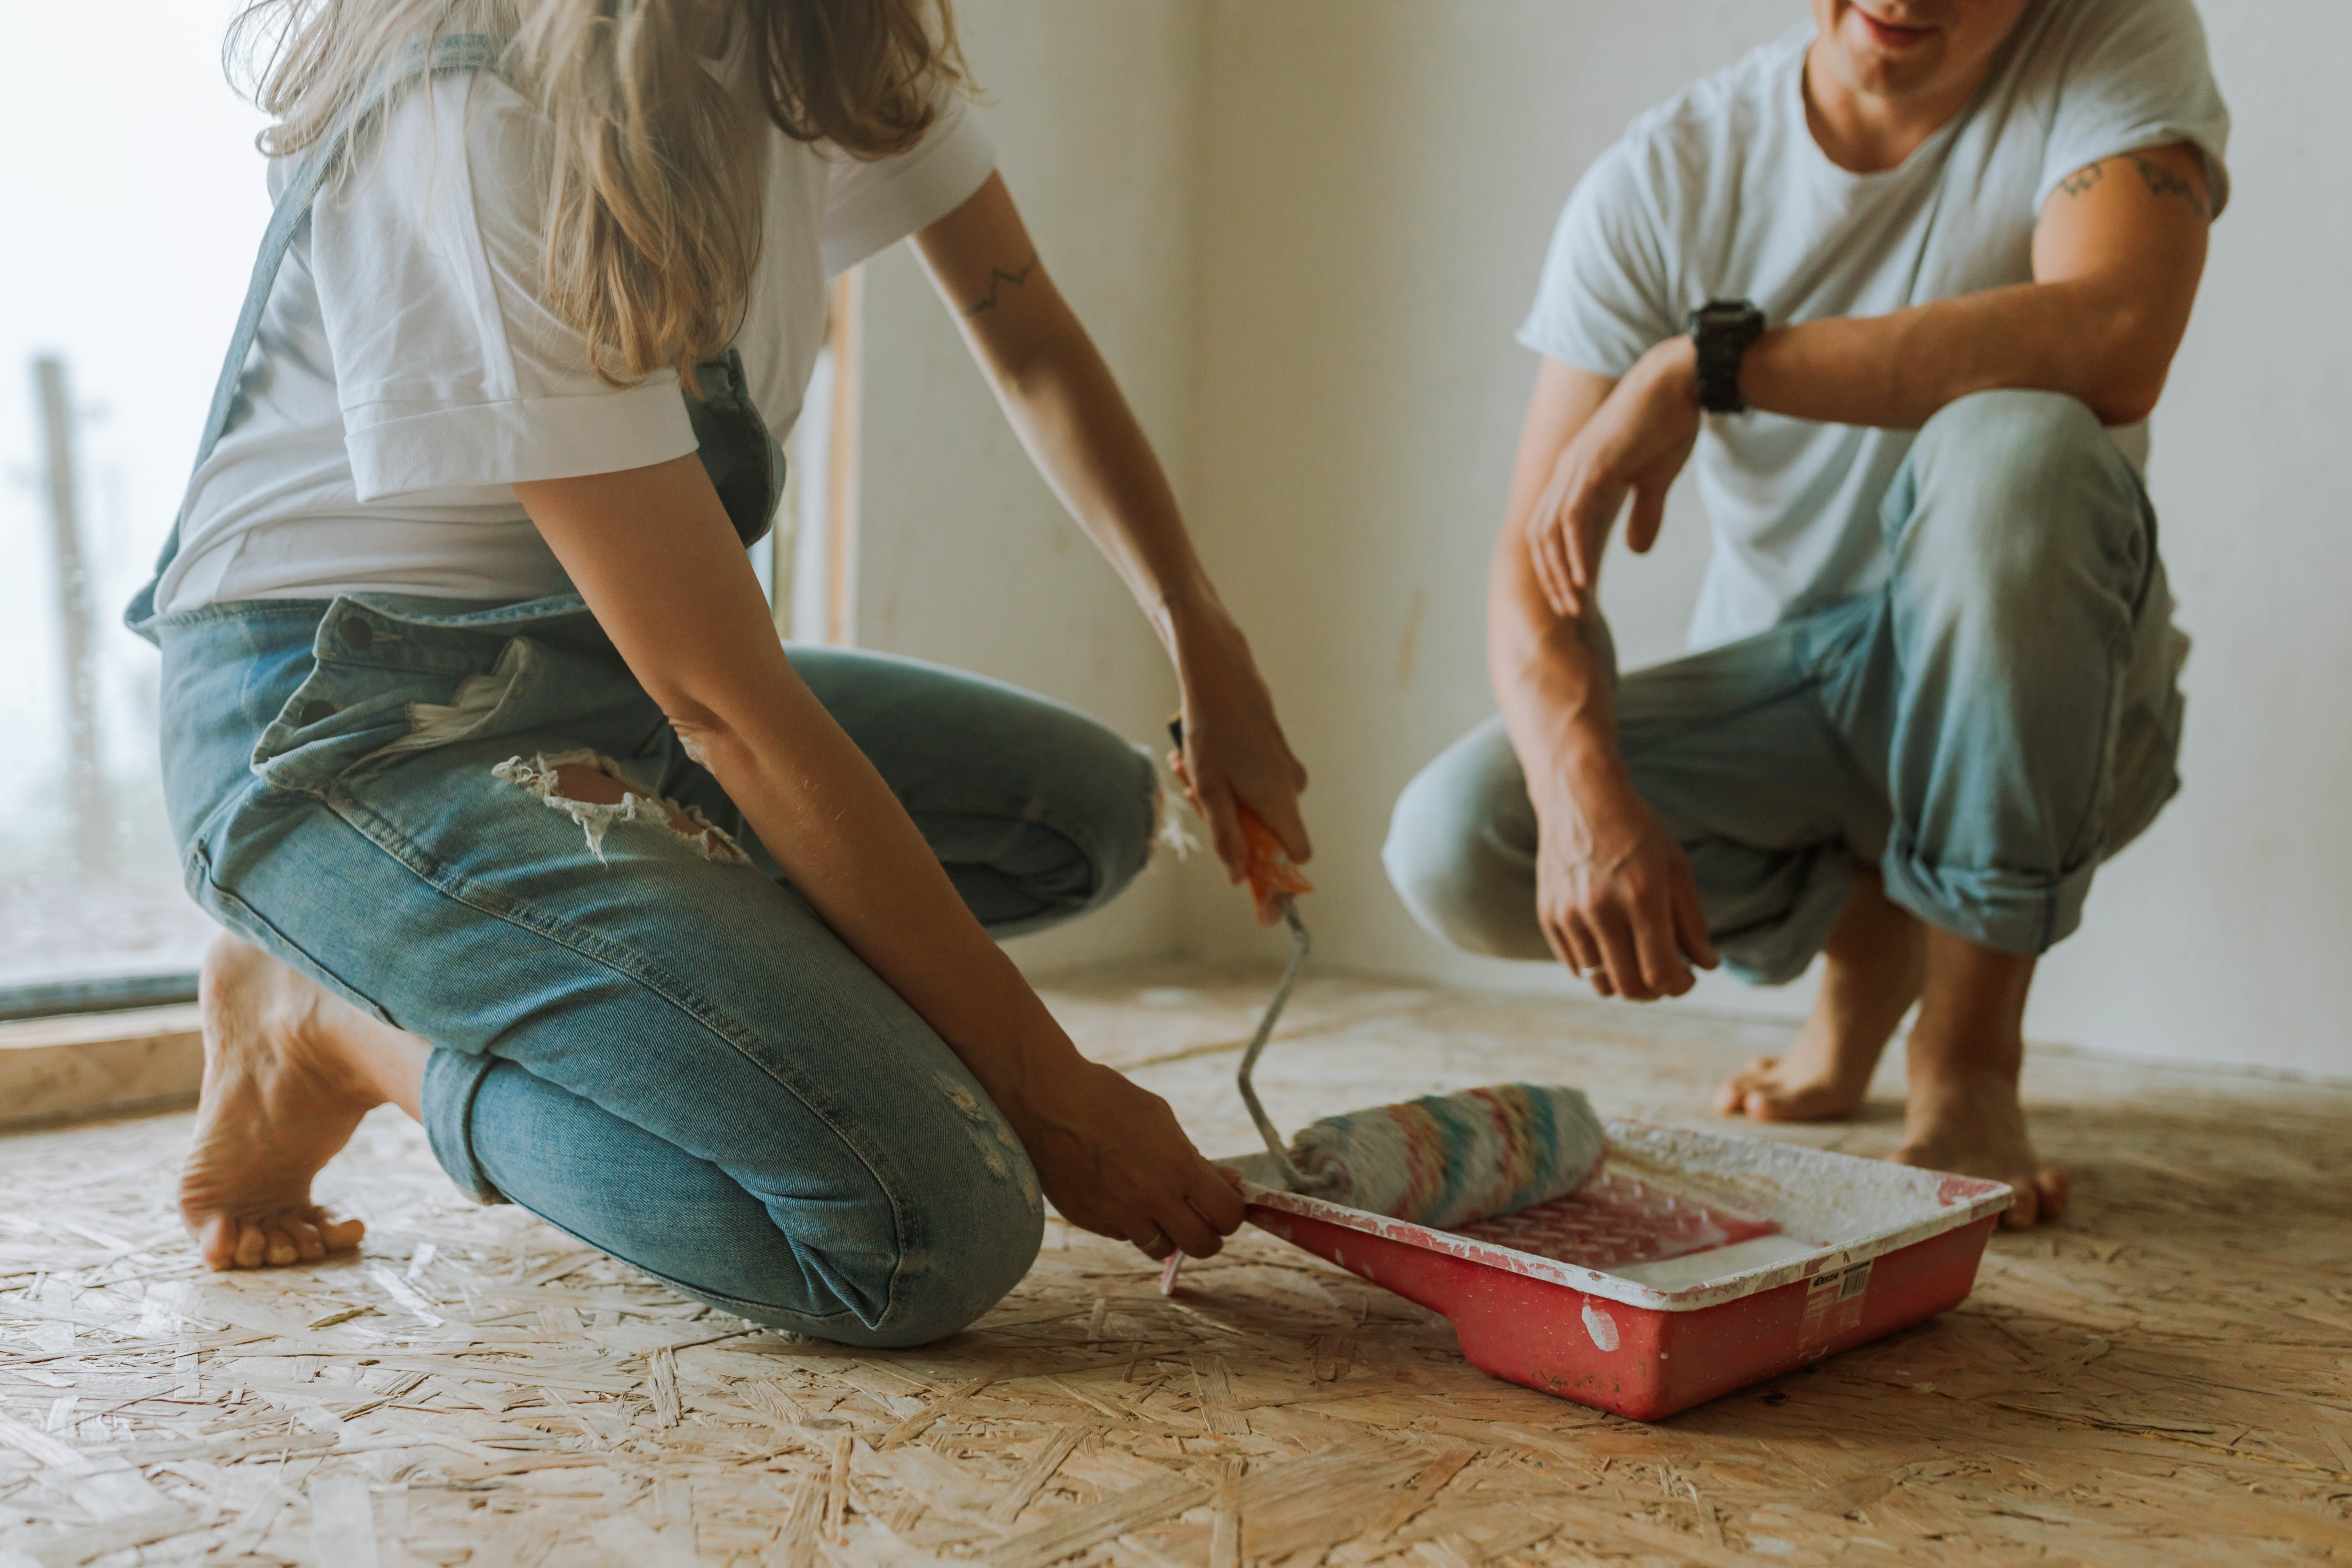 Couple working on paint and flooring together, close-up.